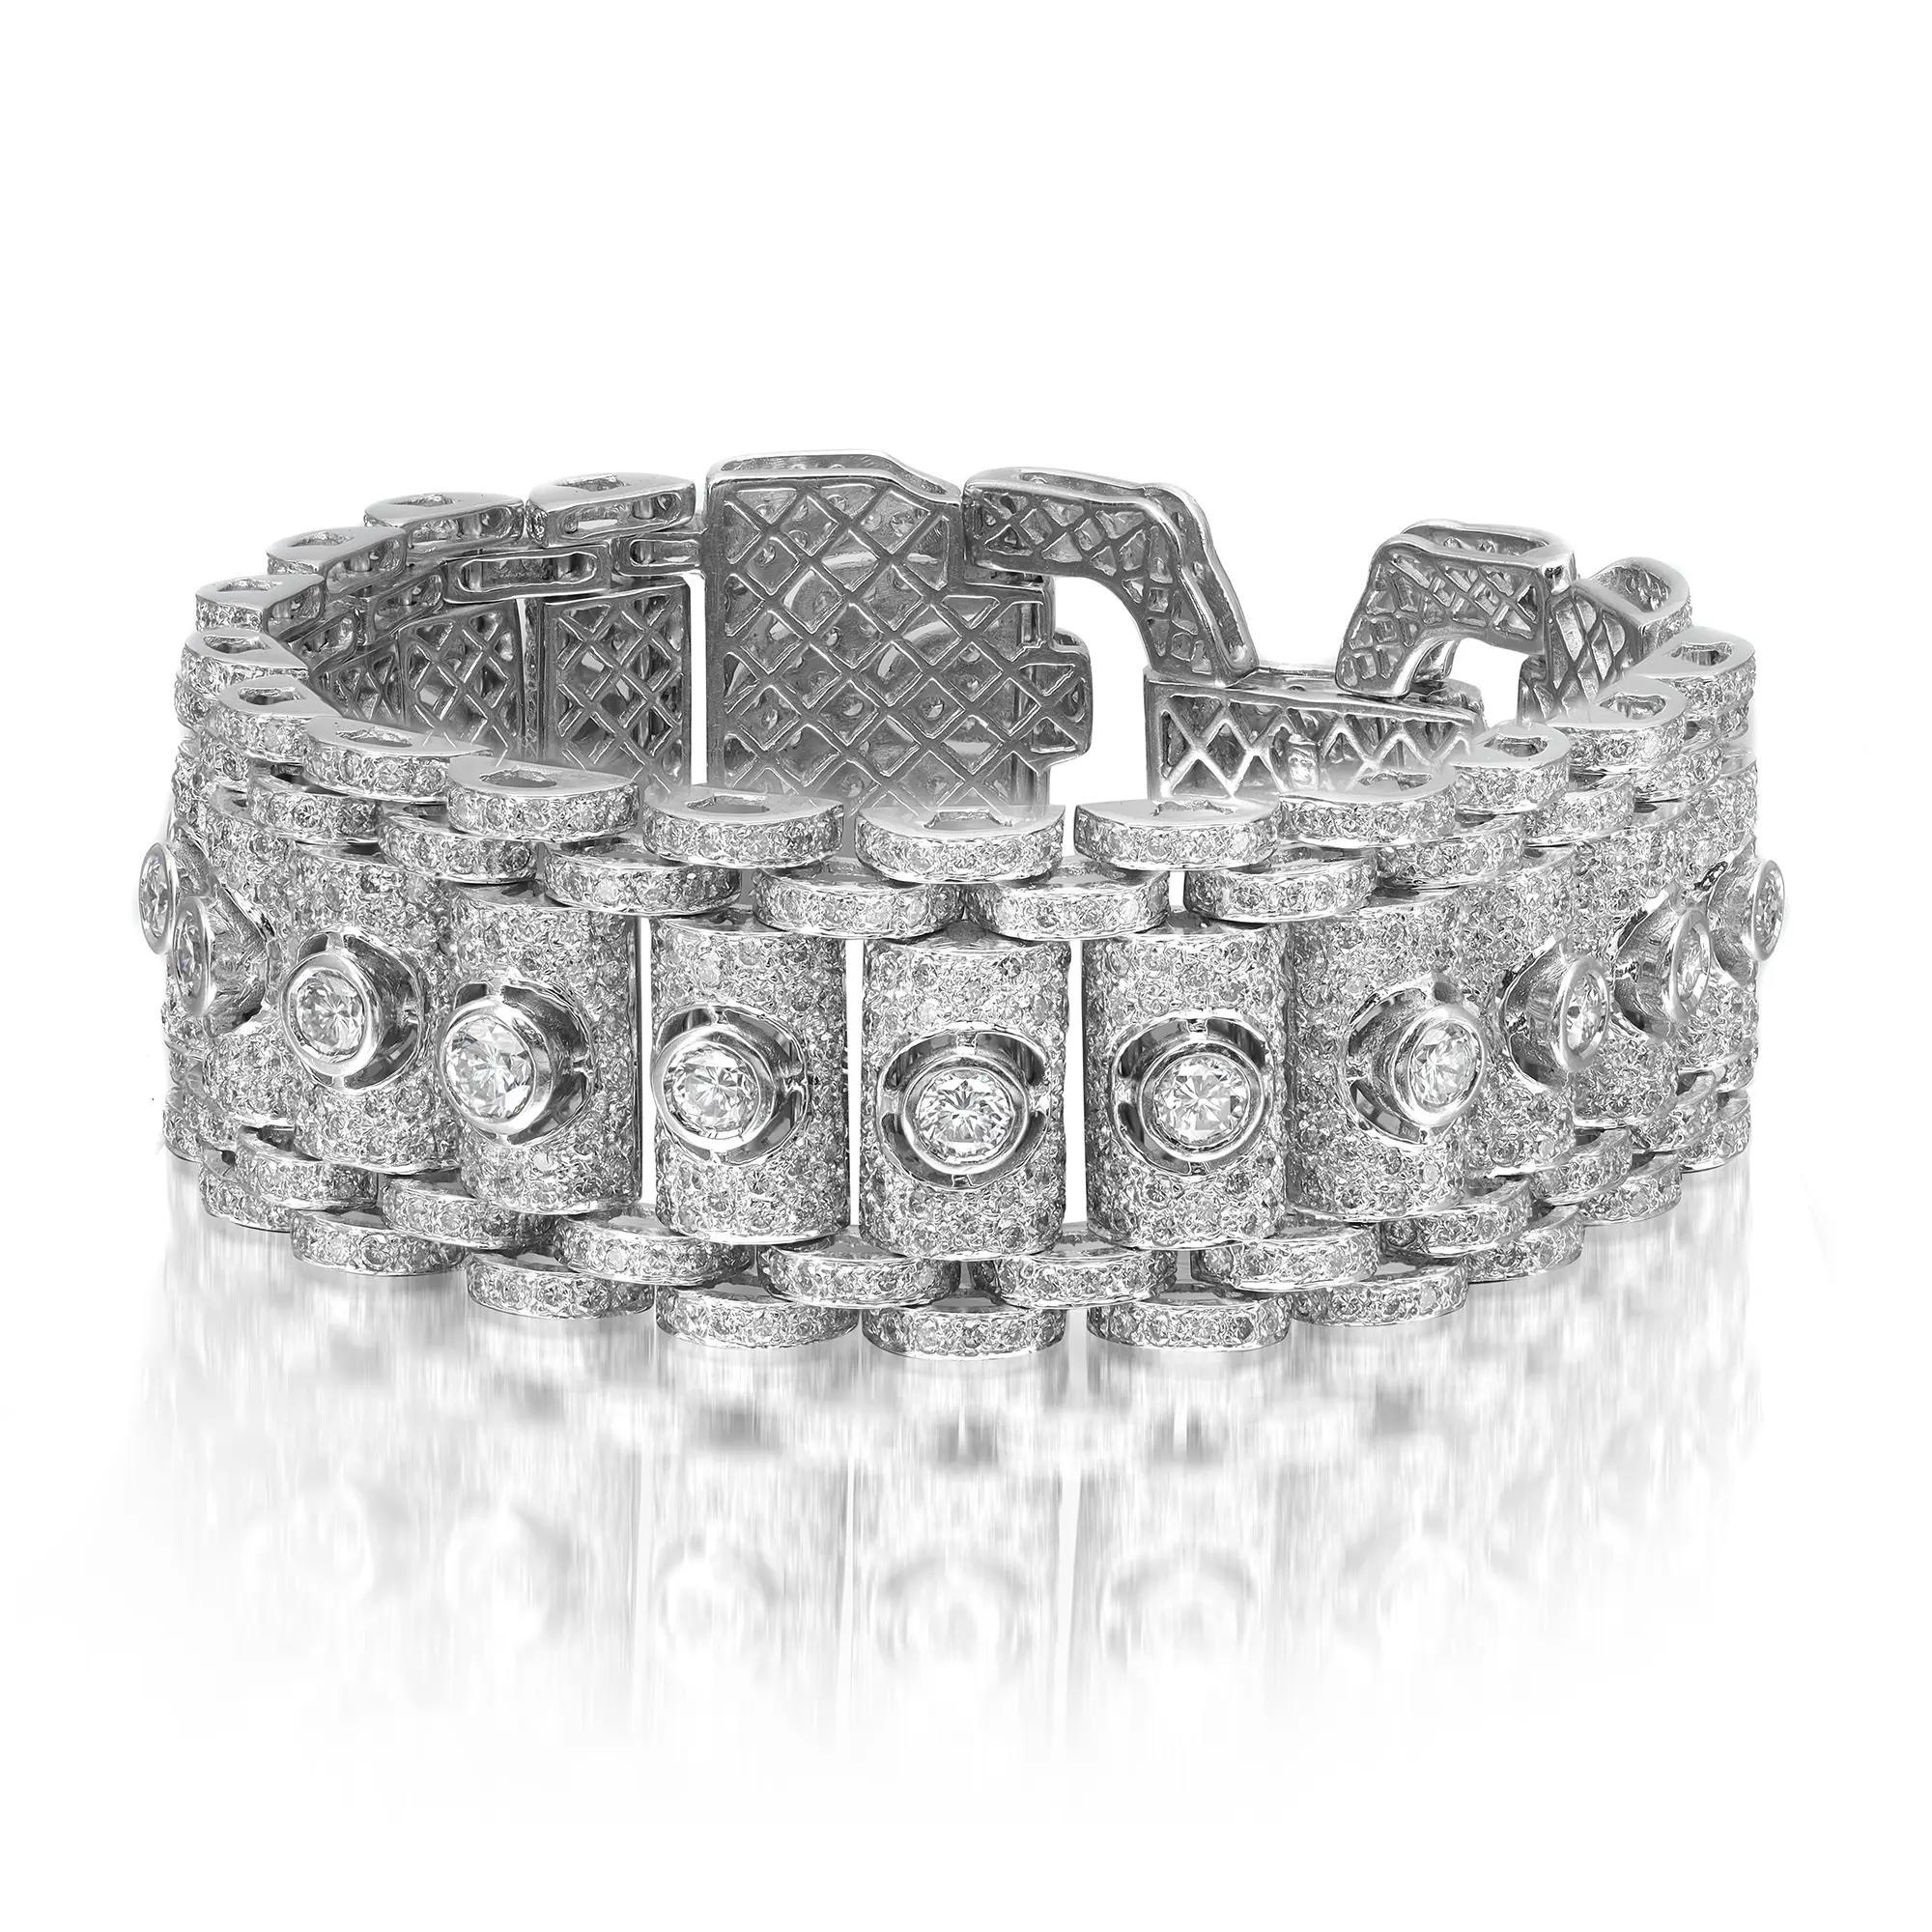 8.00cttw Antique Round Cut Diamond Wide Fancy Bracelet 18k White Gold In Excellent Condition For Sale In New York, NY